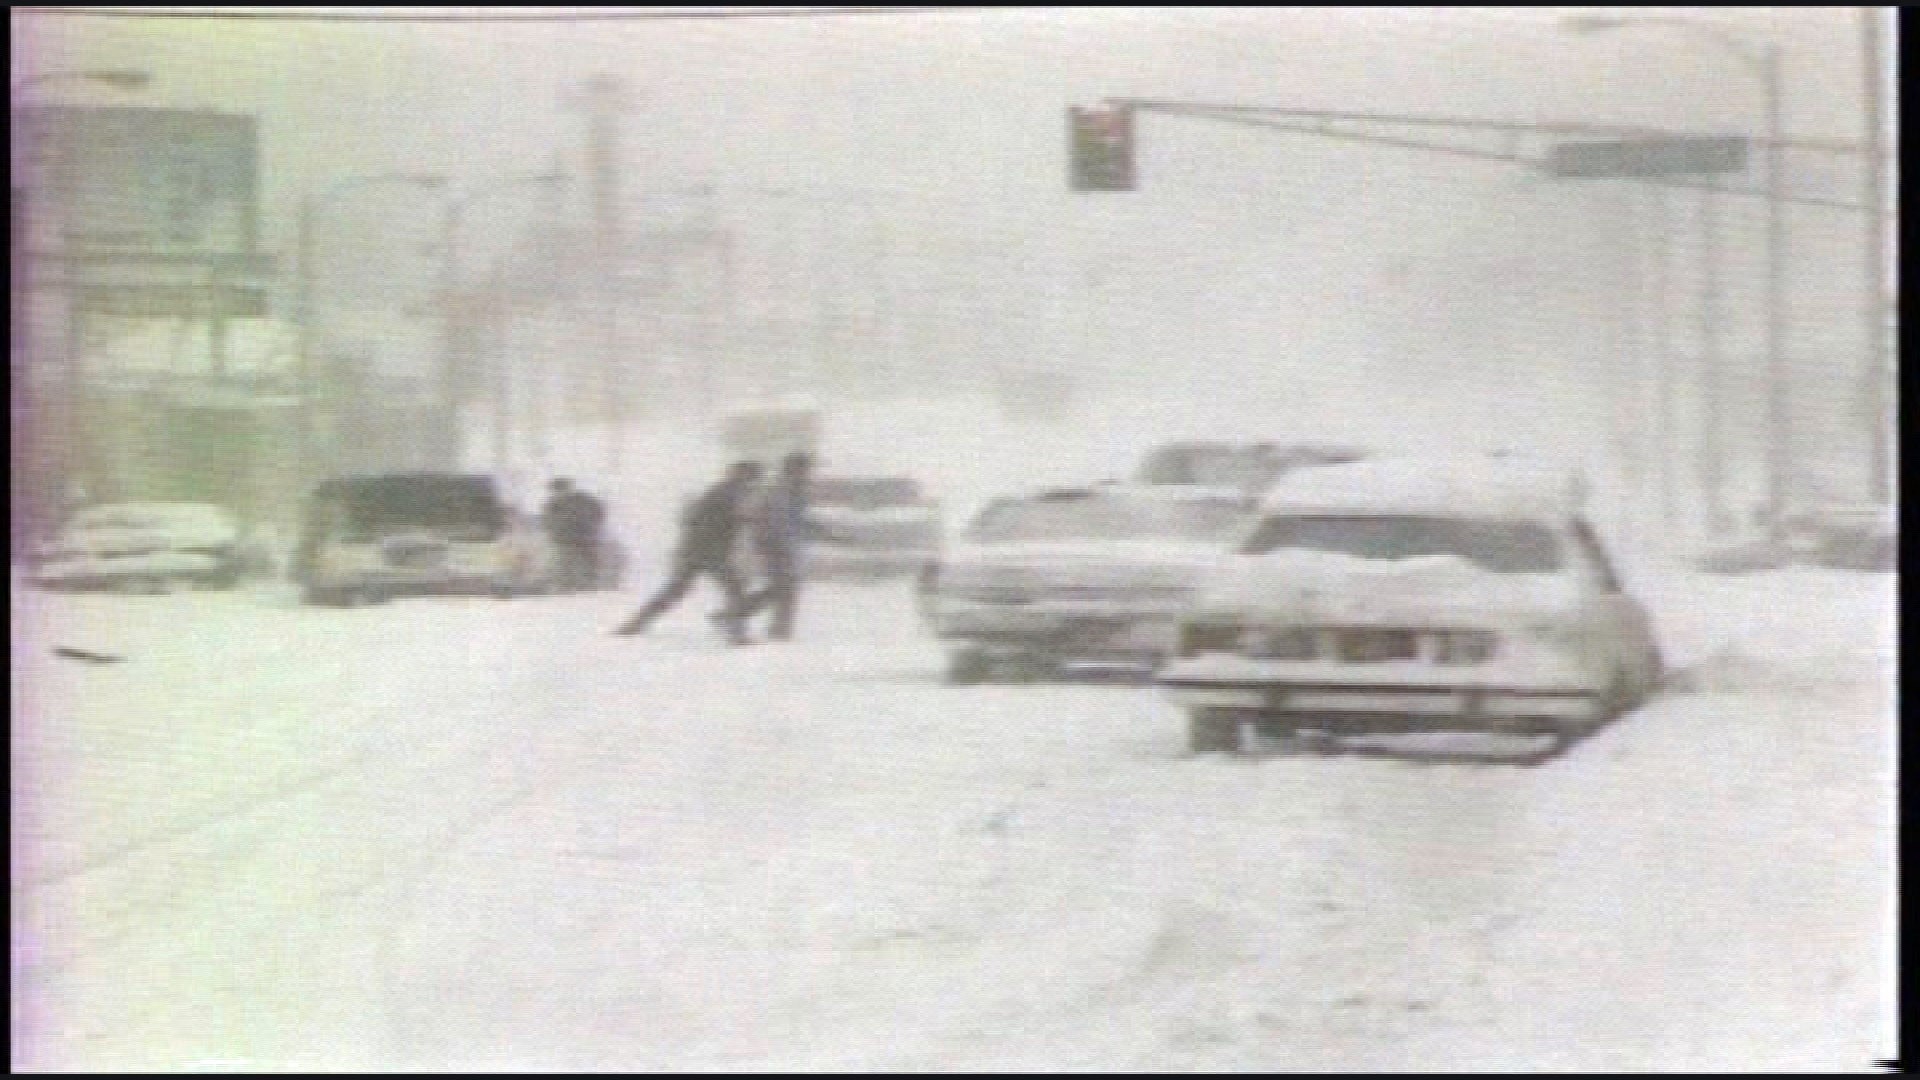 The Great Blizzard of 1982 happened Jan. 30, 1982. St. Louis and surrounding areas were paralyzed under more than a foot of snow.